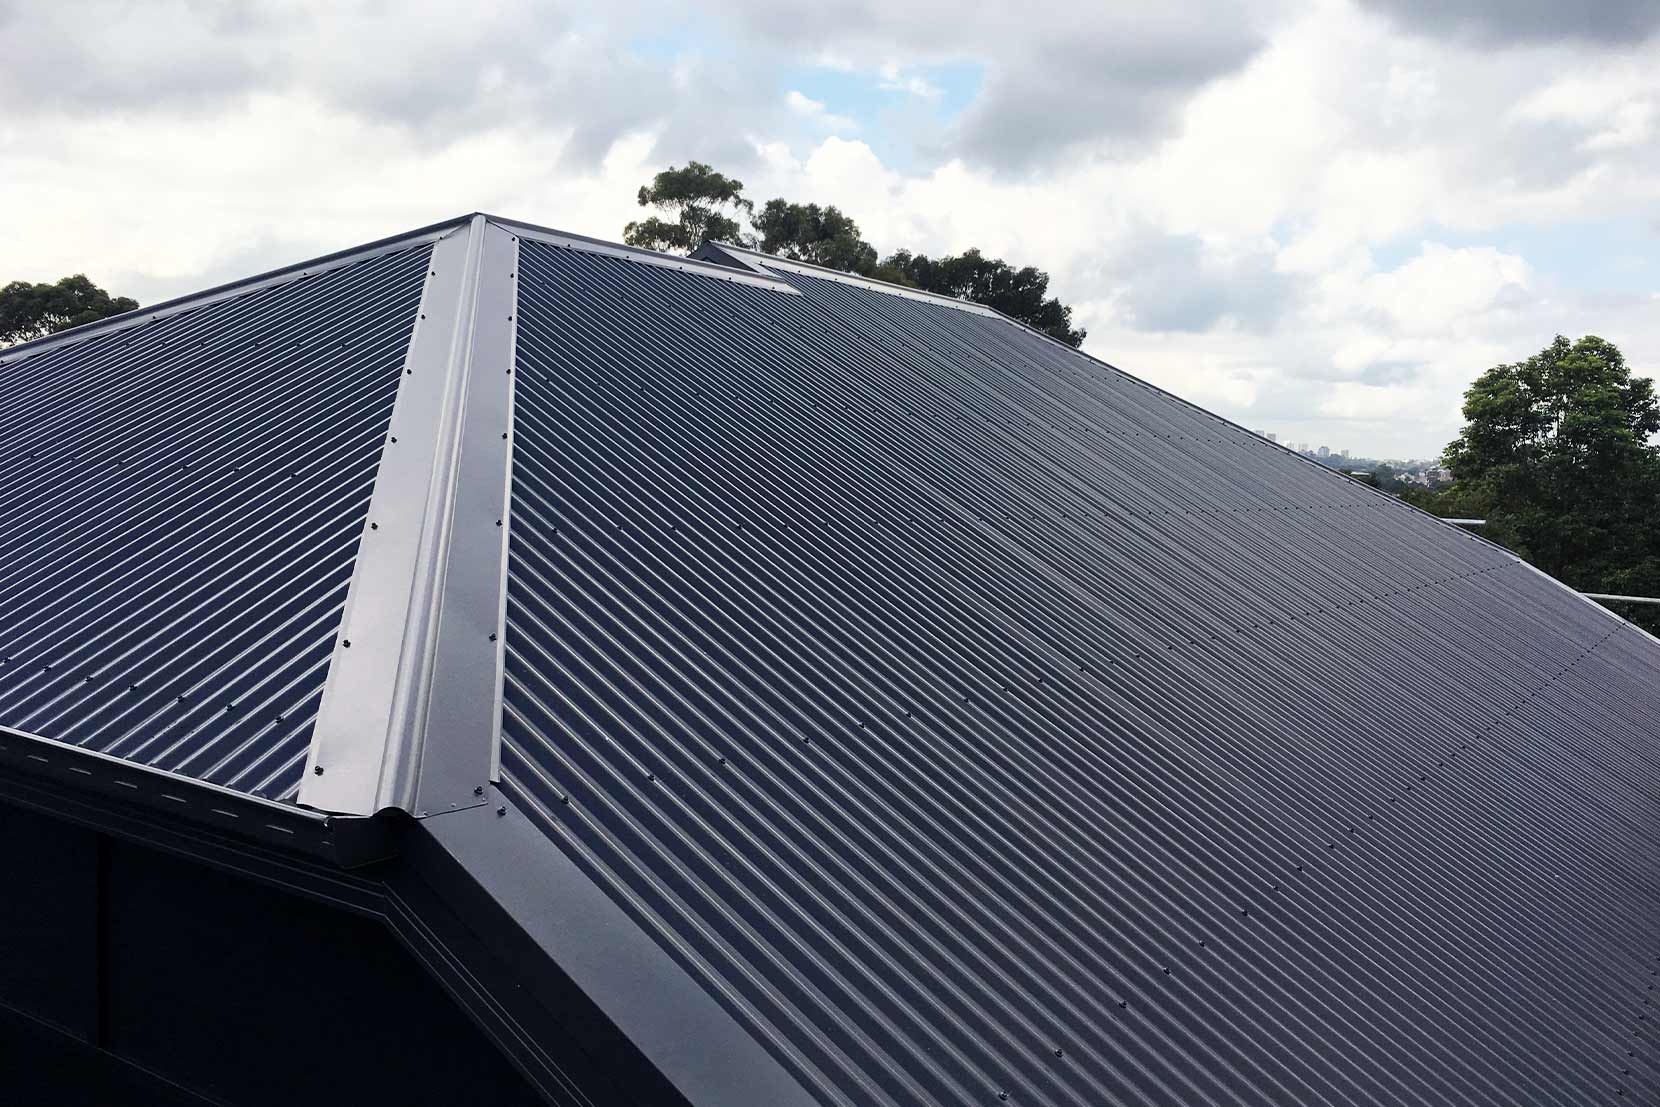 Izico Metal Roofing long lasting and highly resistant